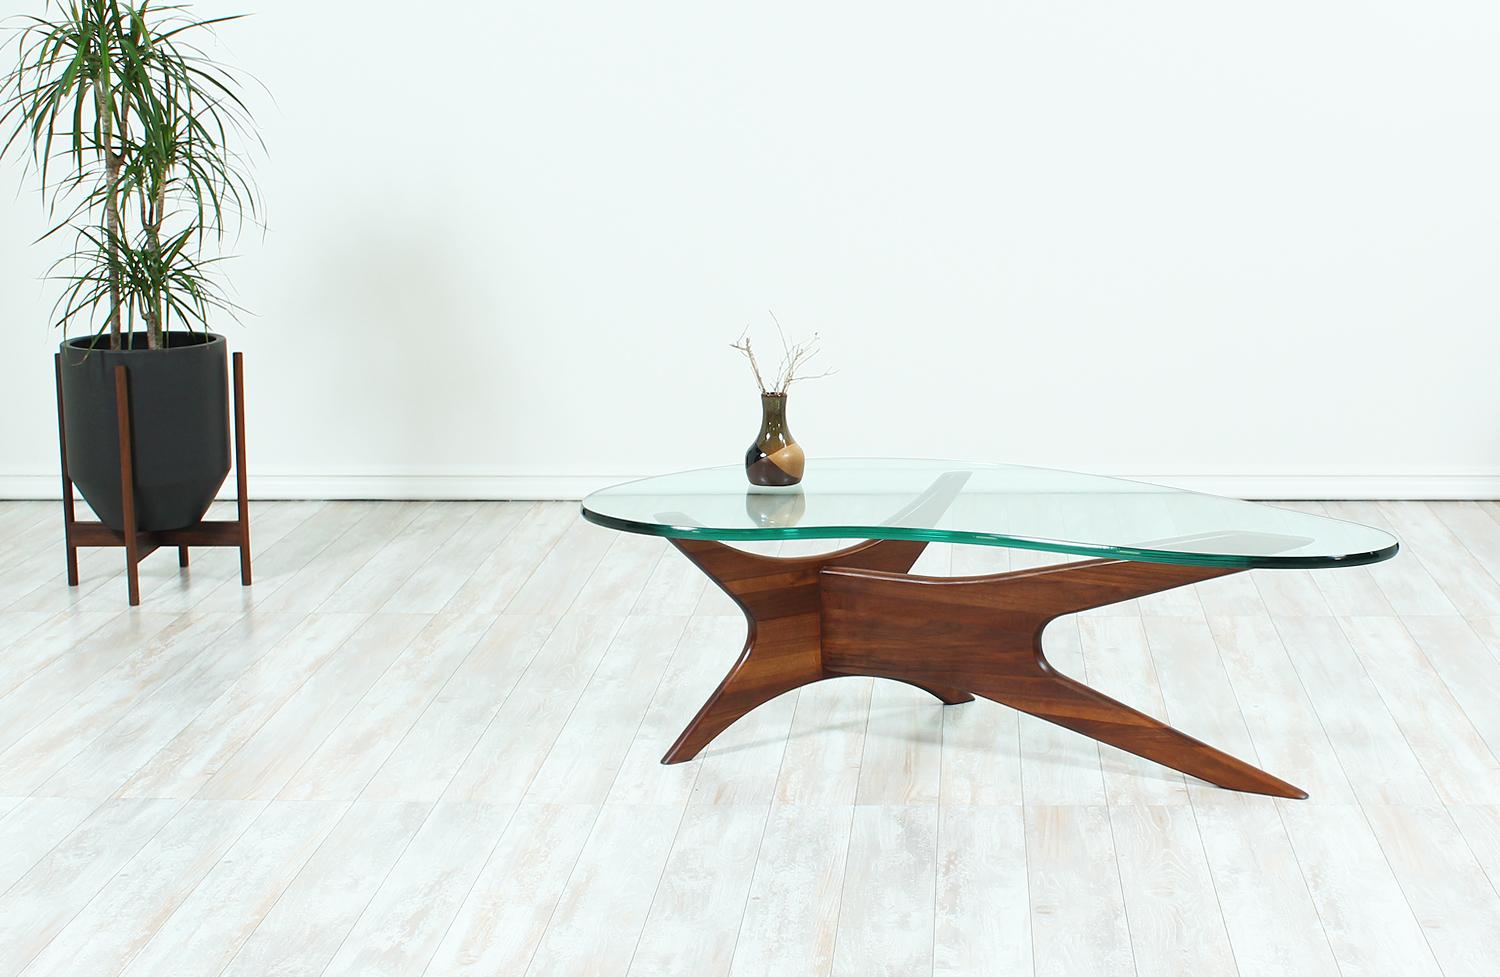 Model 1465-T coffee table designed by Adrian Pearsall for Craft Associates in the United States circa 1960s. This exceptionally crafted coffee table features a sturdy sculpted walnut wood base with arched arms that support the newly-made